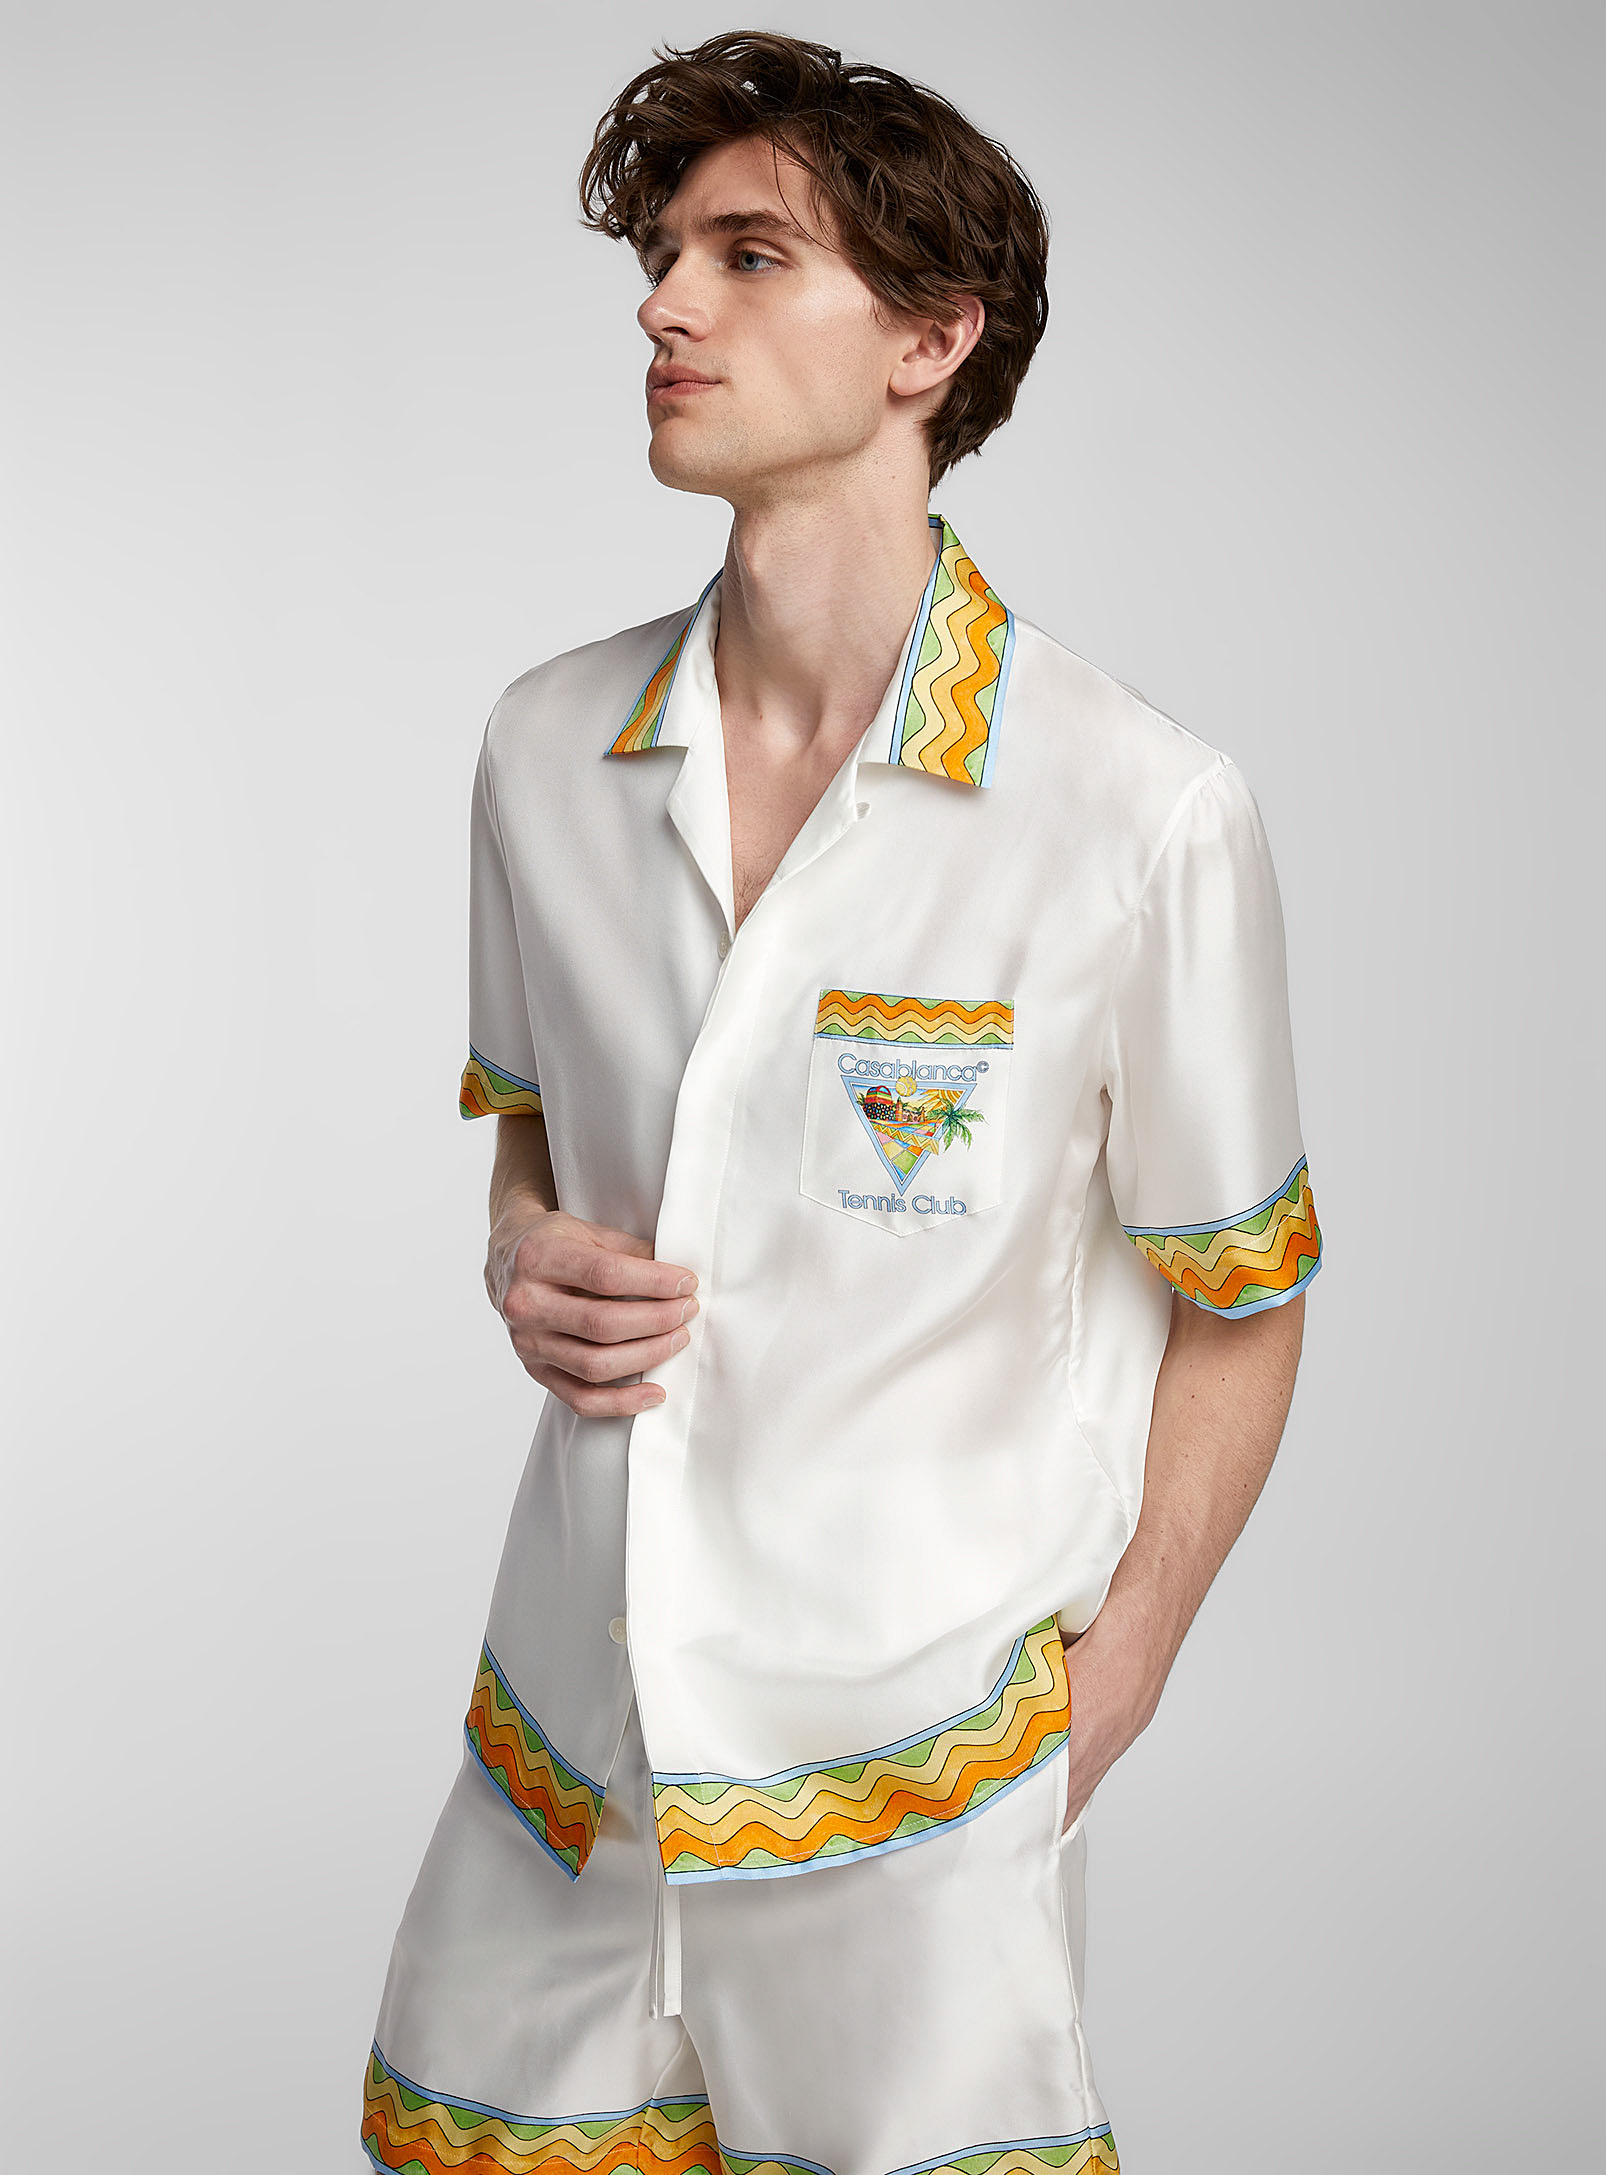 Shop Casablanca Afro Cubism Tennis Club Silk Shirt In Patterned White